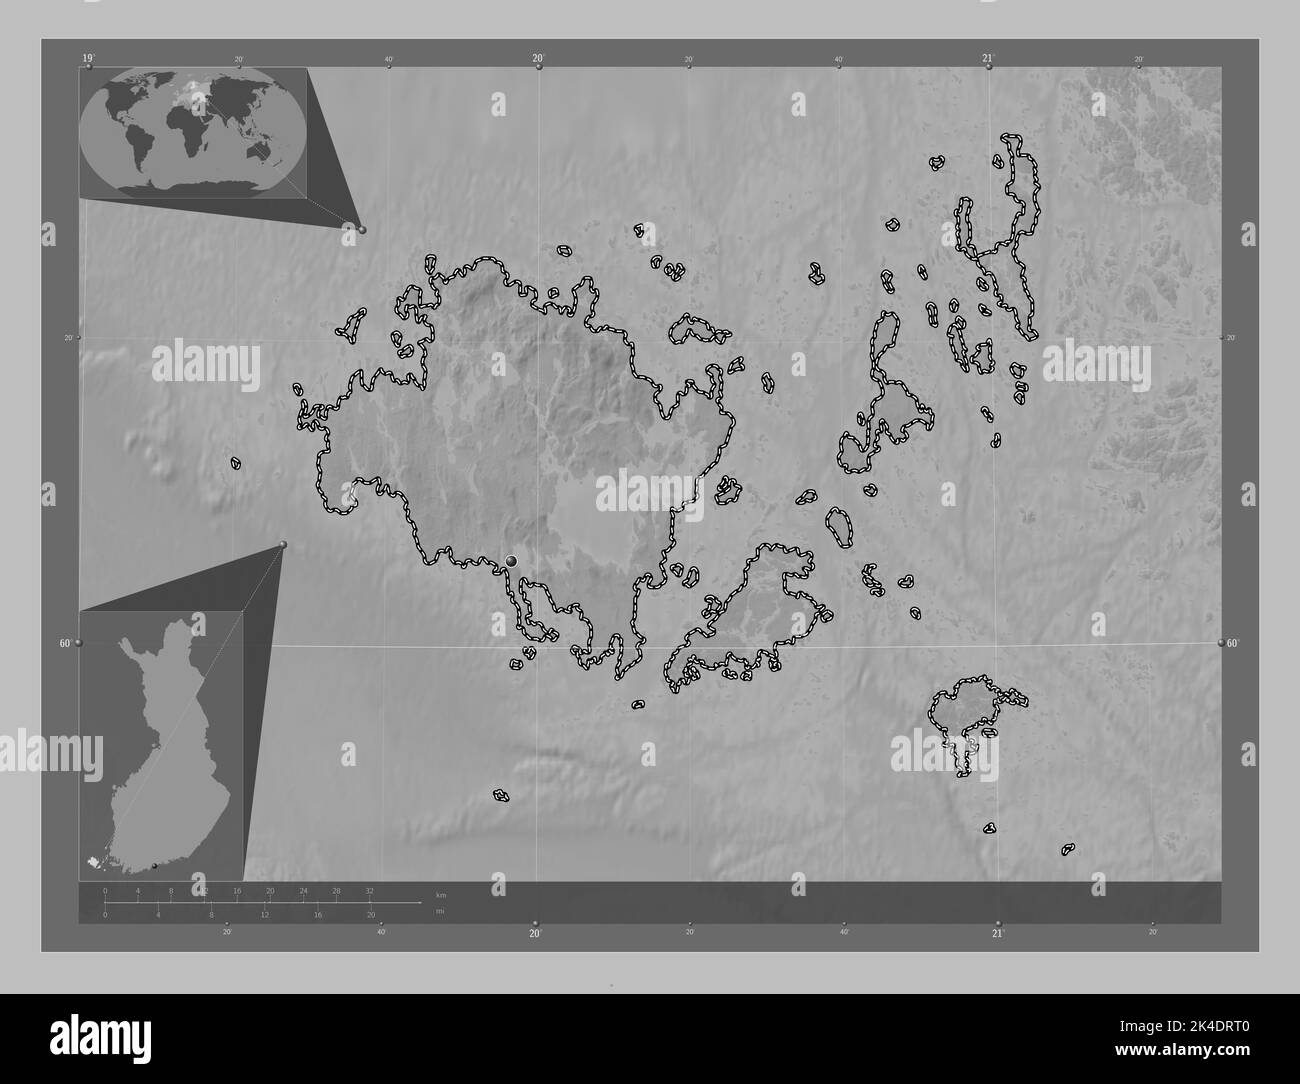 Aland, region of Finland. Grayscale elevation map with lakes and rivers. Corner auxiliary location maps Stock Photo